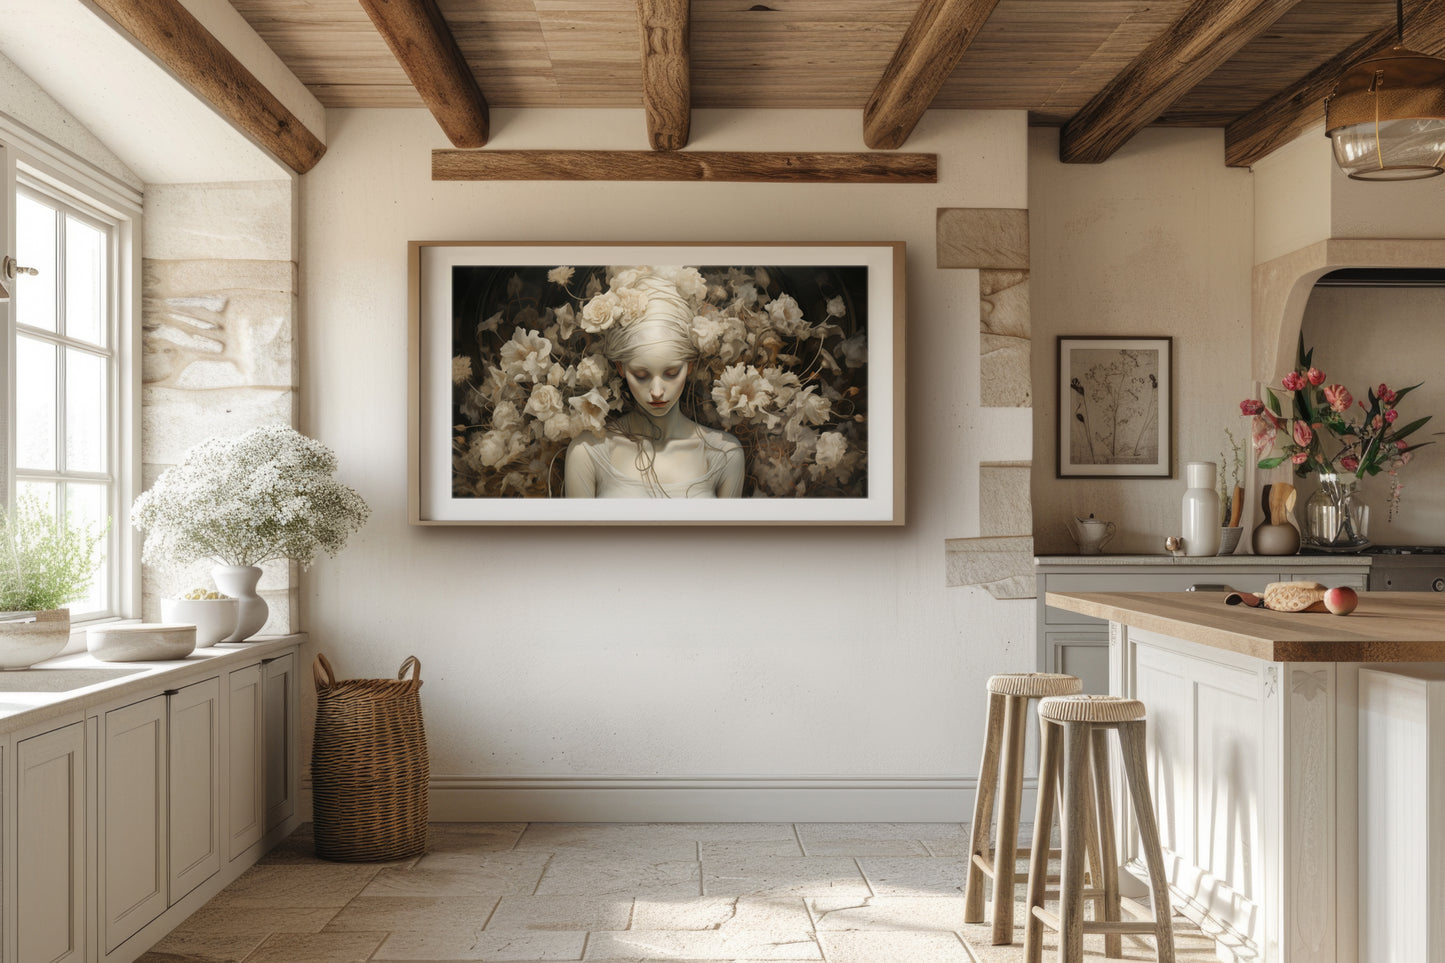 Artwork print featuring a peaceful figure surrounded by a halo of white flowers, creating an ethereal and serene visual. This fine art print is a captivating visual fable.